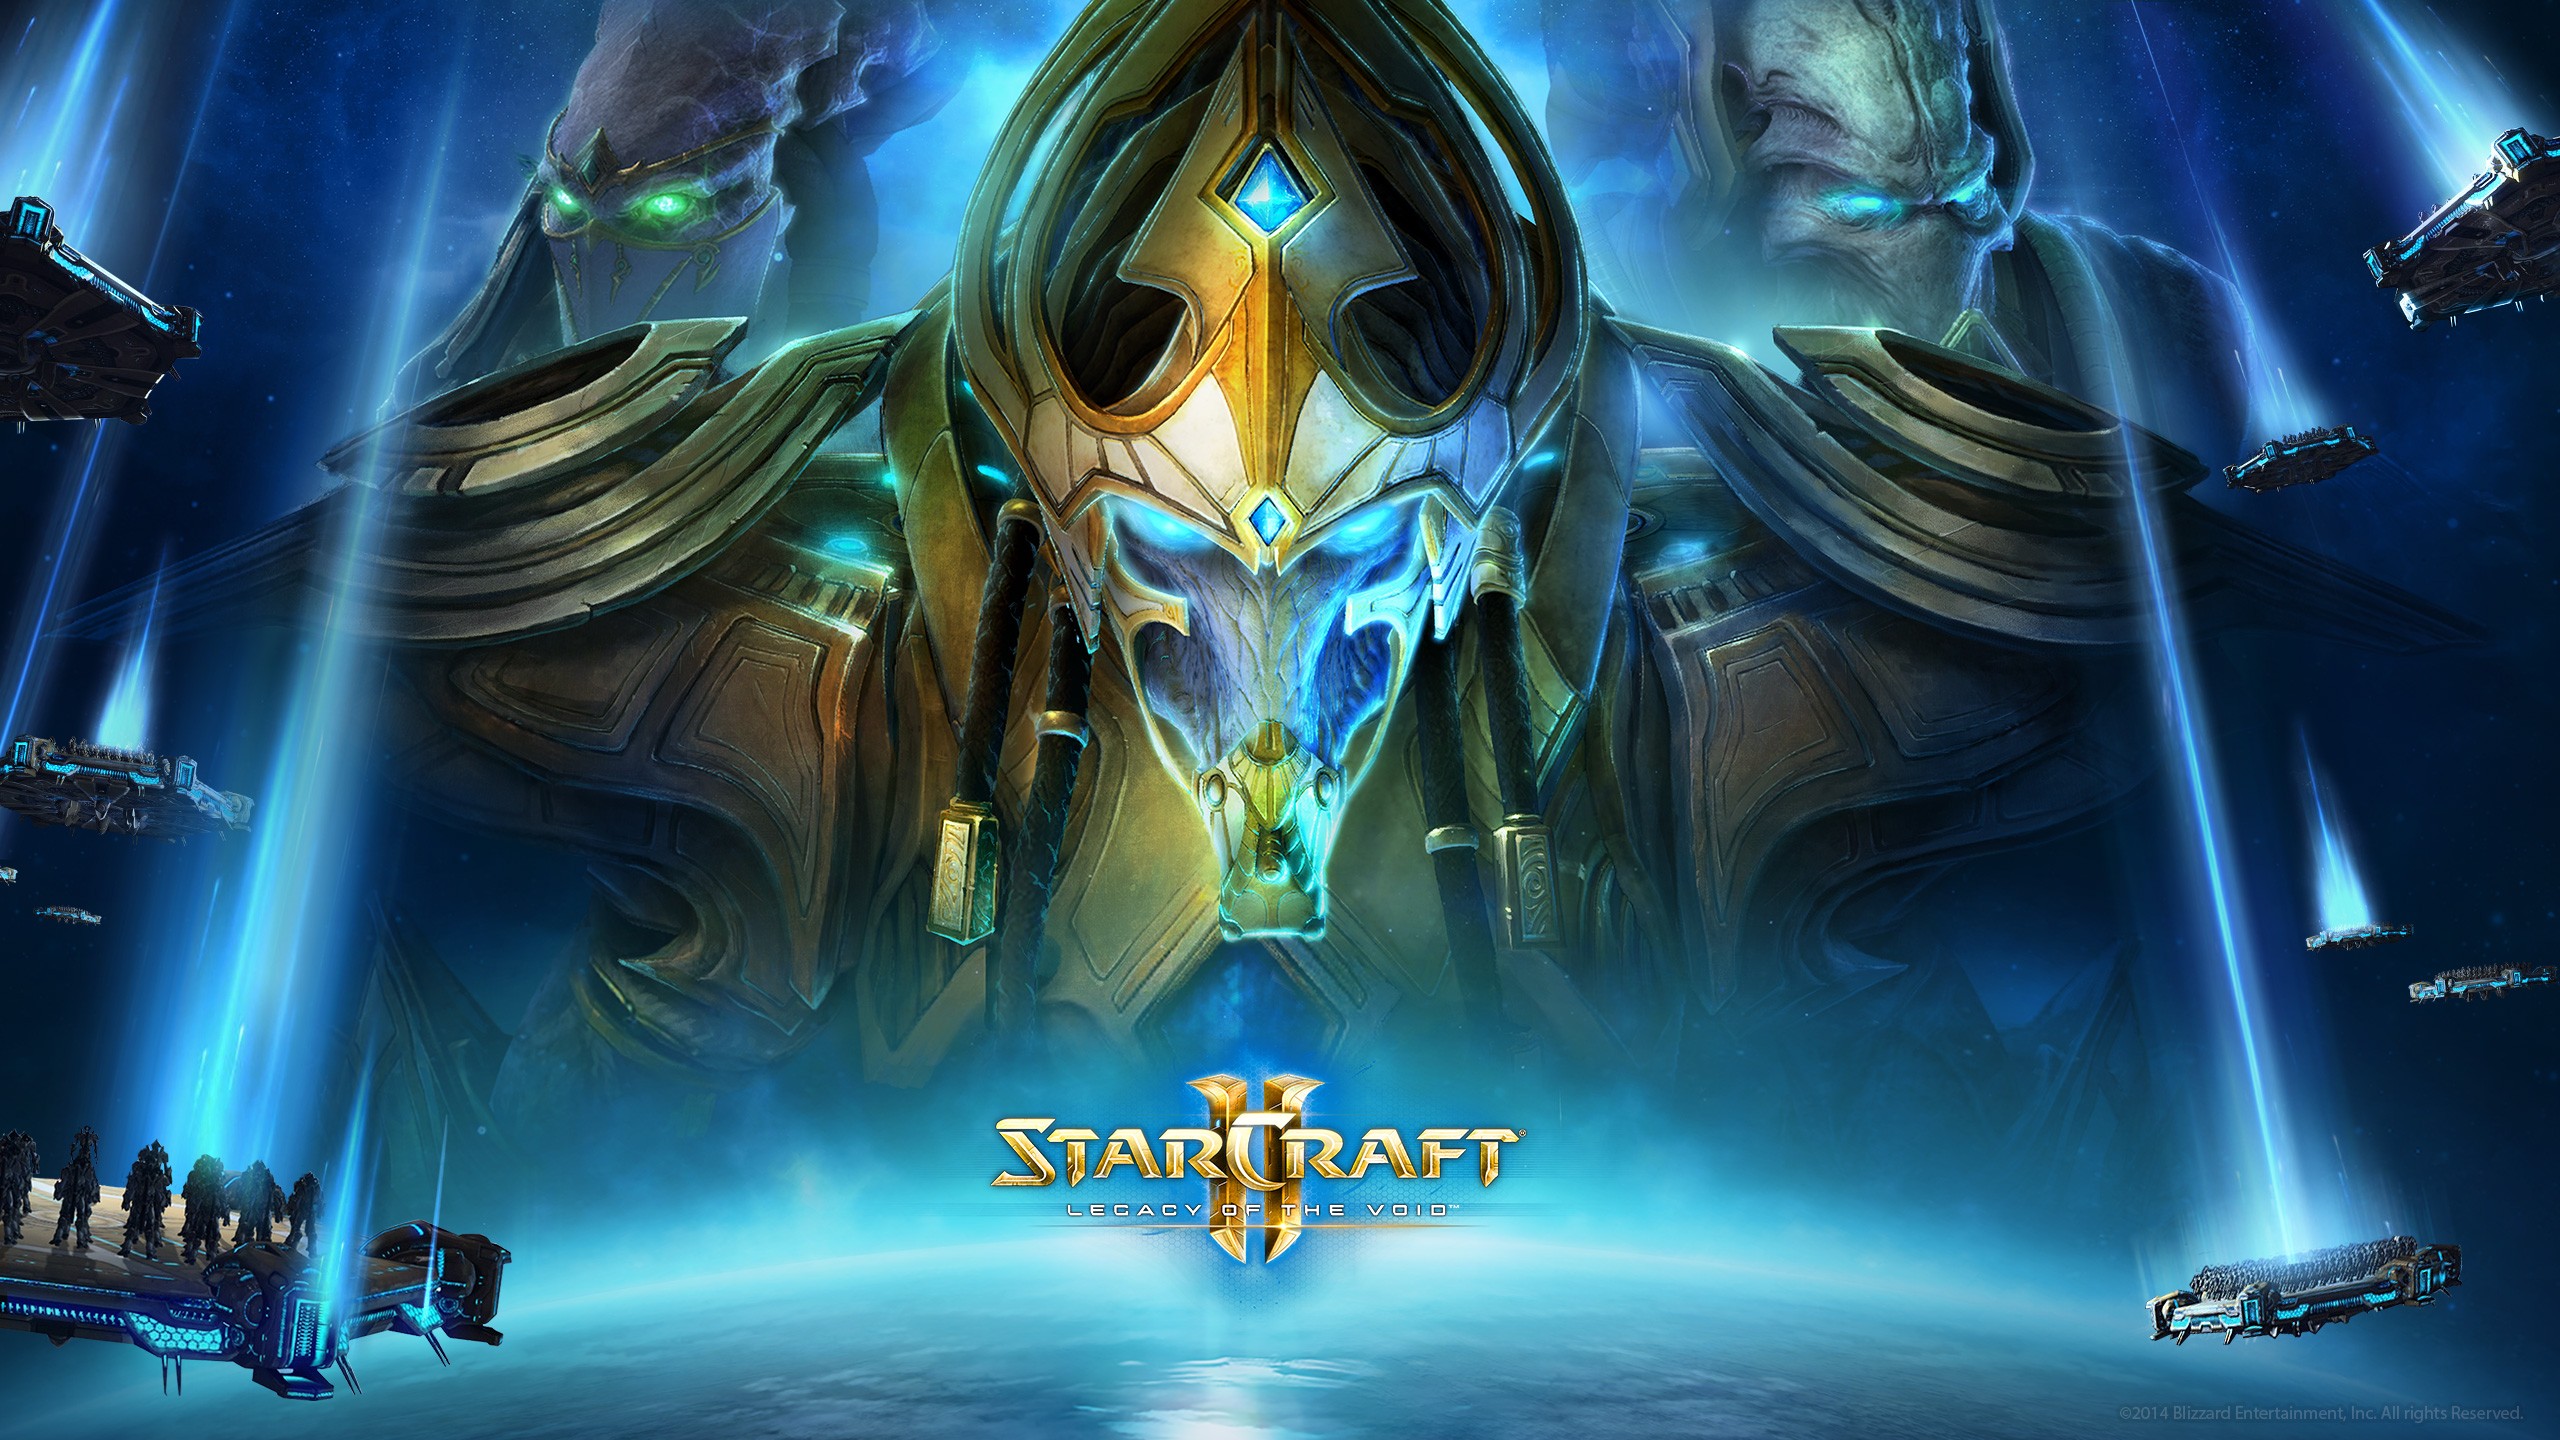 Starcraft II, Legacy Of The Void, Video Games Wallpaper